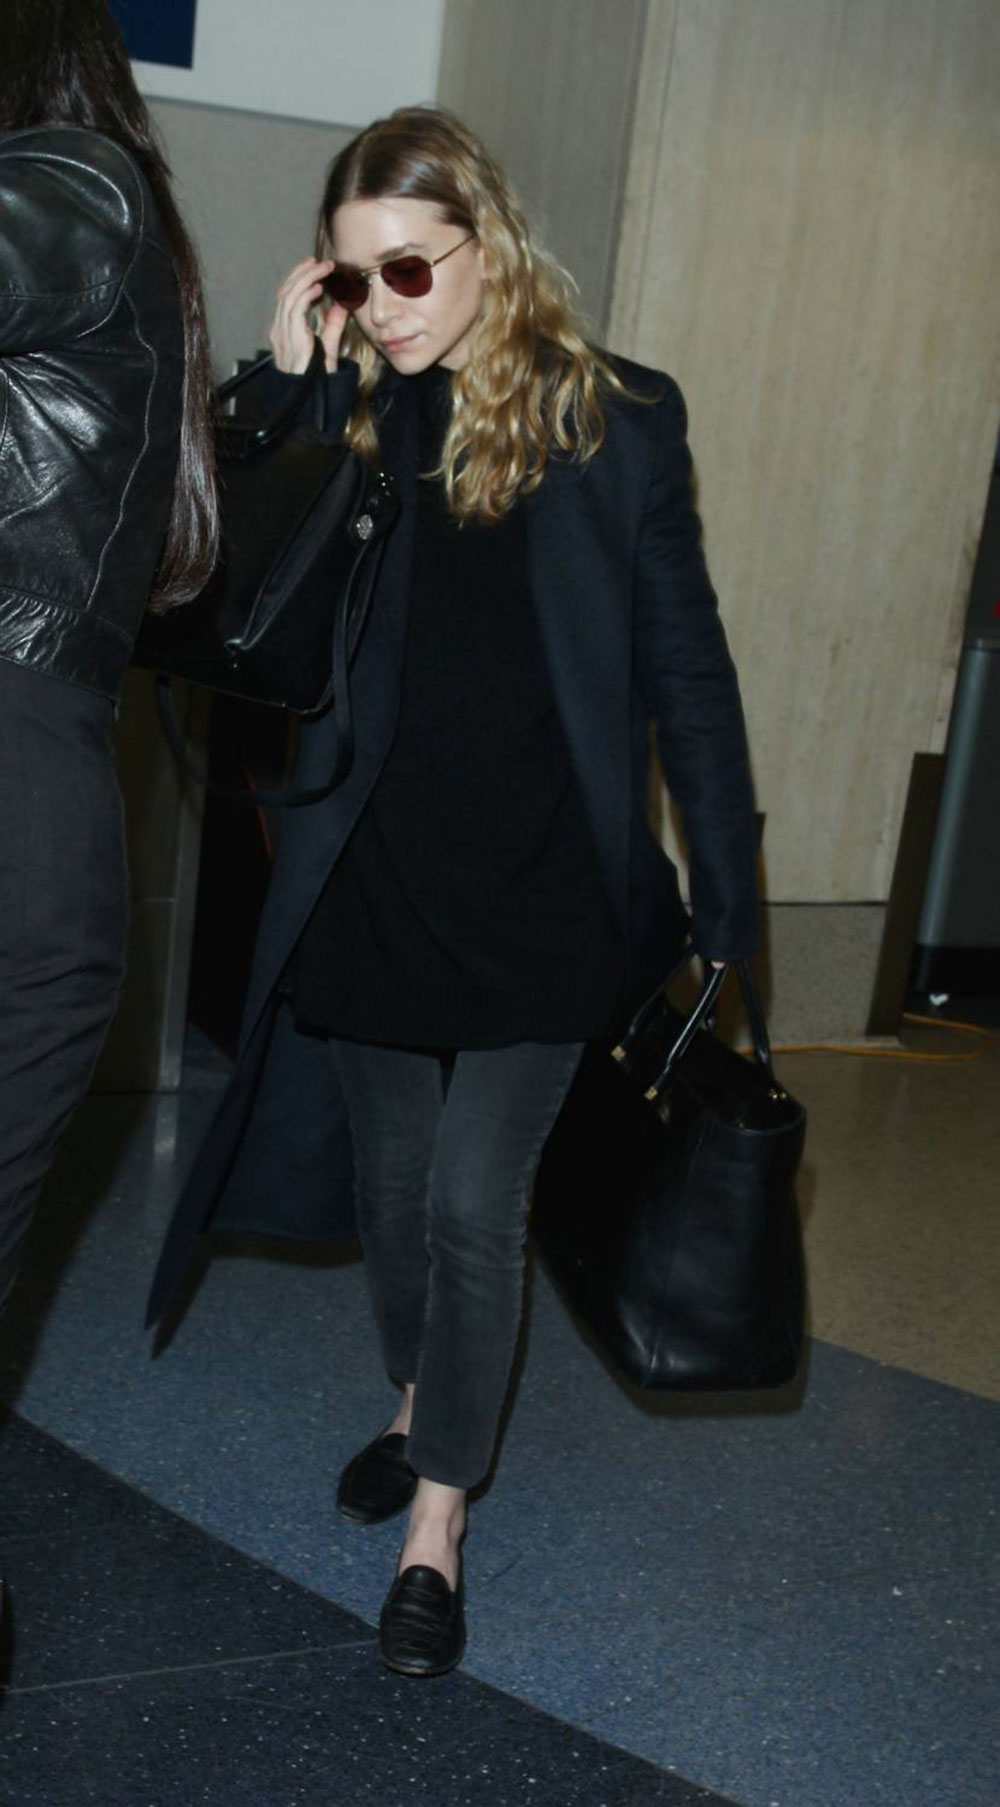 ASHLEY OLSEN Arrives at LAX Airport in Los Angeles – HawtCelebs